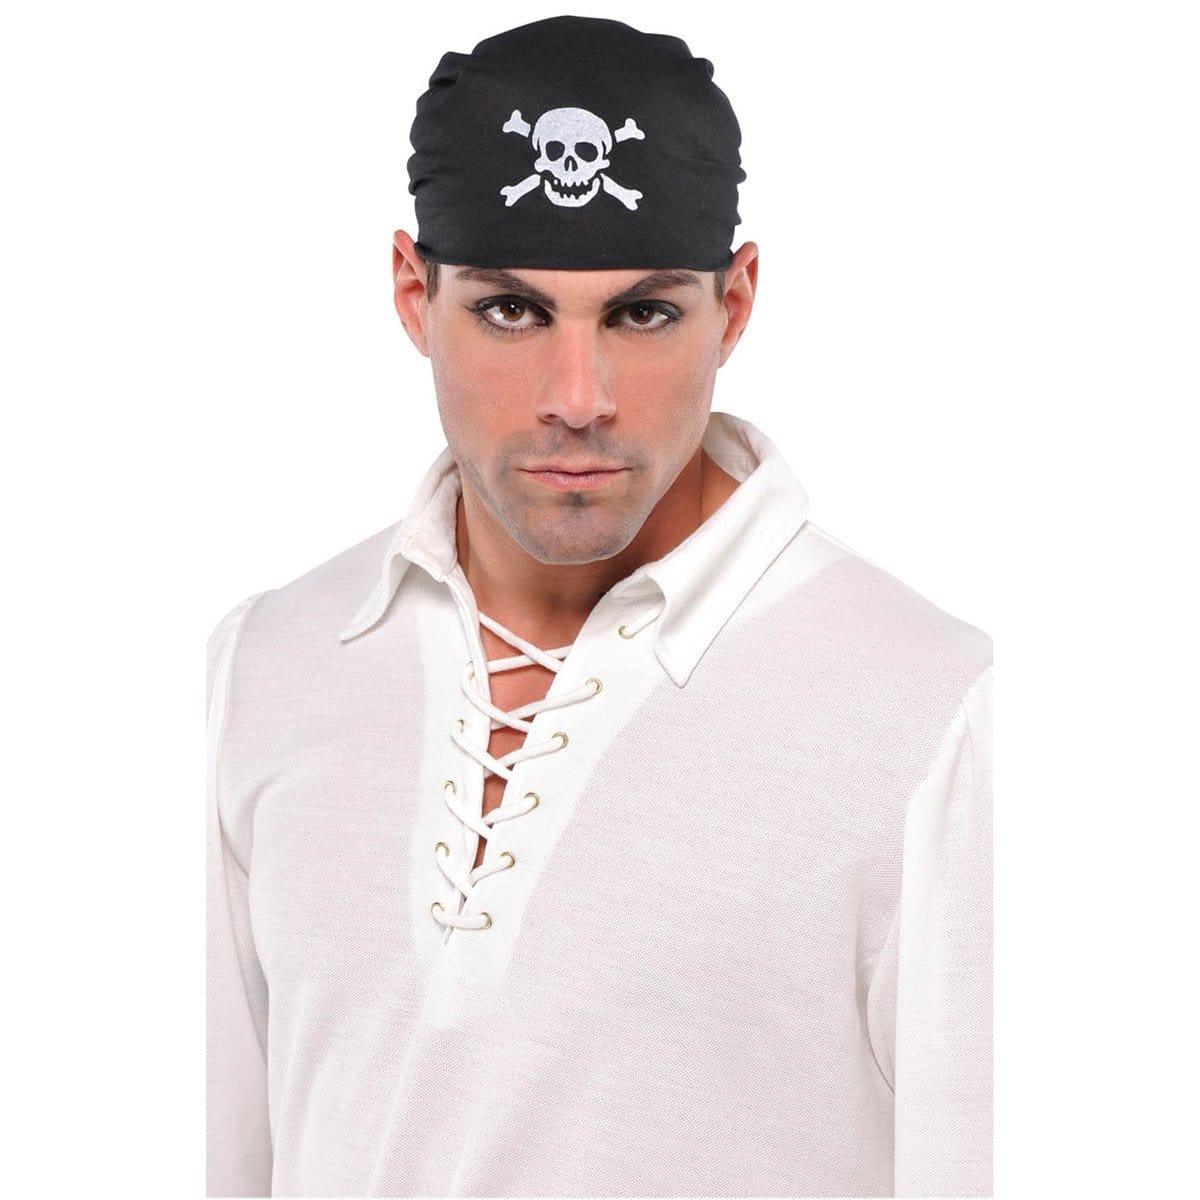 Buy Costume Accessories Pirate bandana with white skull for adults sold at Party Expert